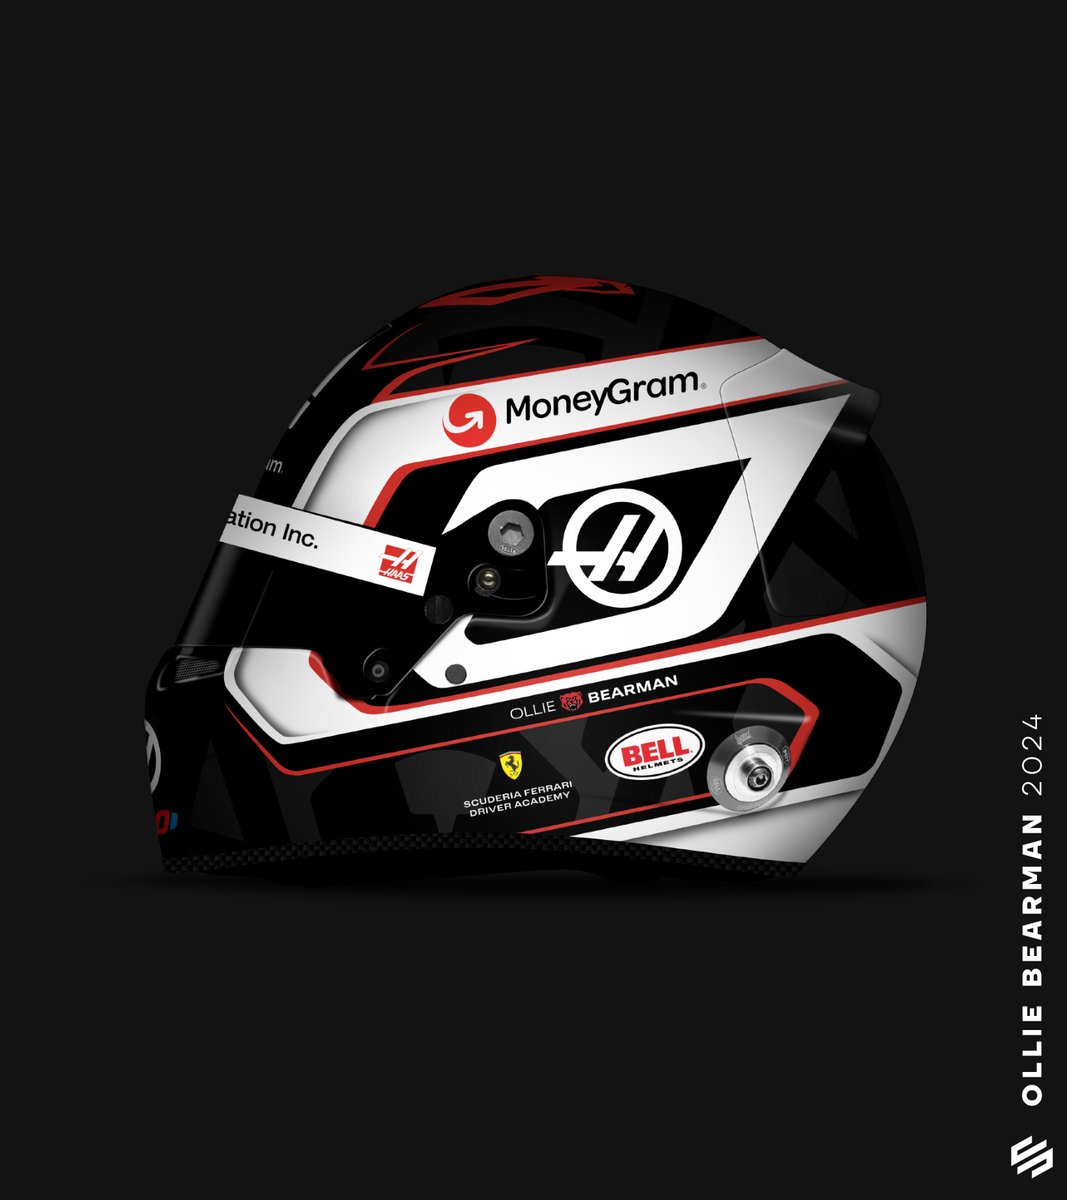 First 2024 Haas design for @OllieBearman! Very similar to 2023 which we loved already, just mixing it up with some Haas red in place of the yellow and some small tweaks. 👌🏼